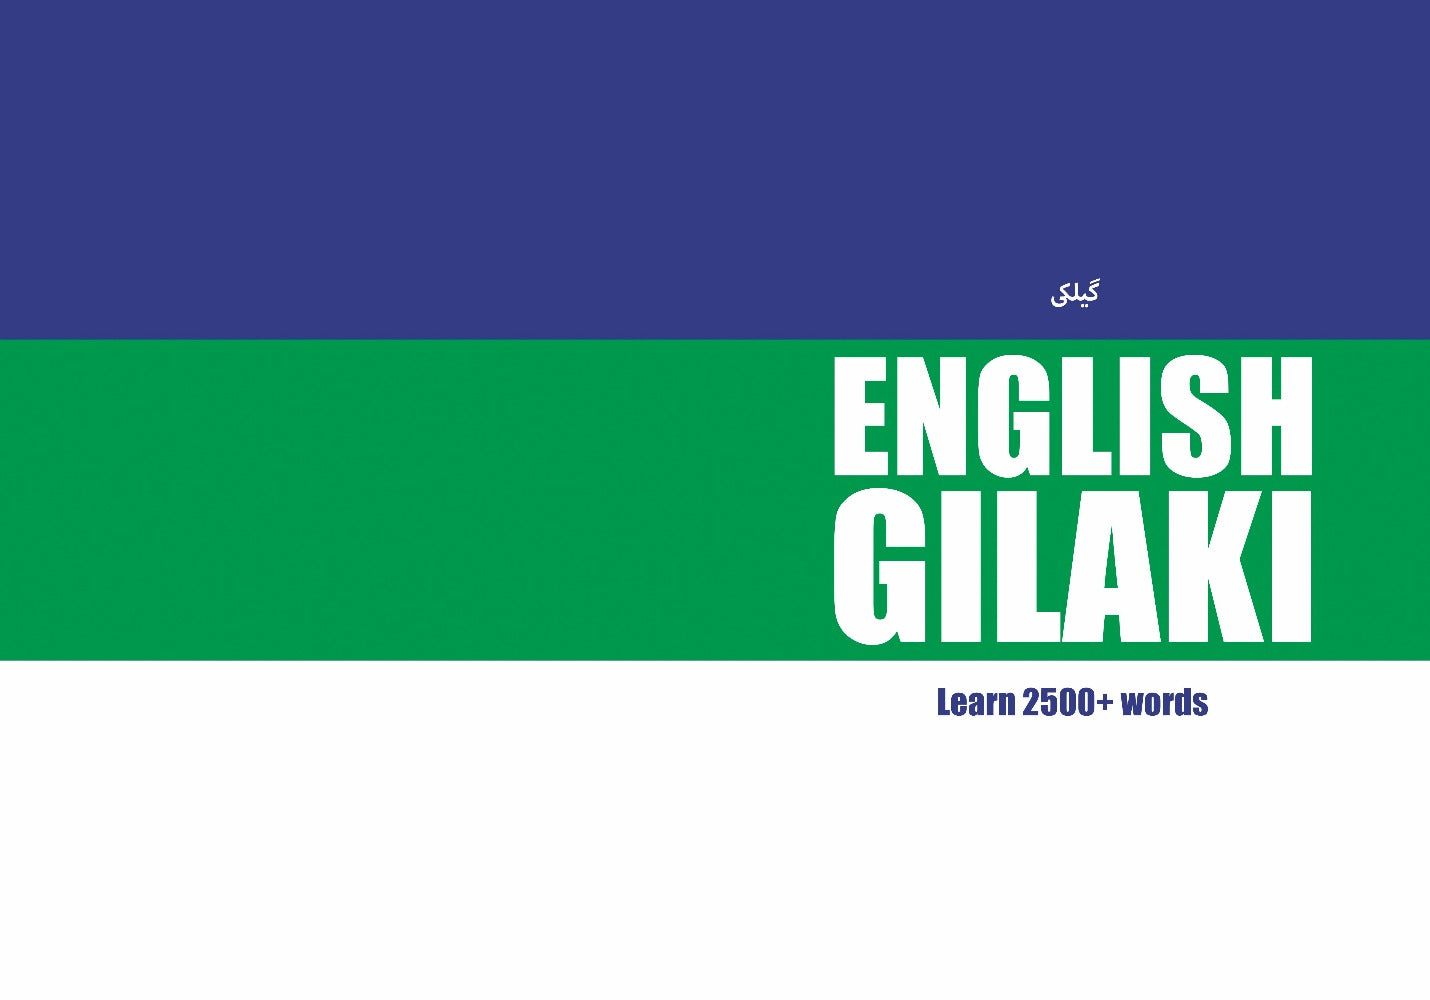 Gilaki language learning notebook cover